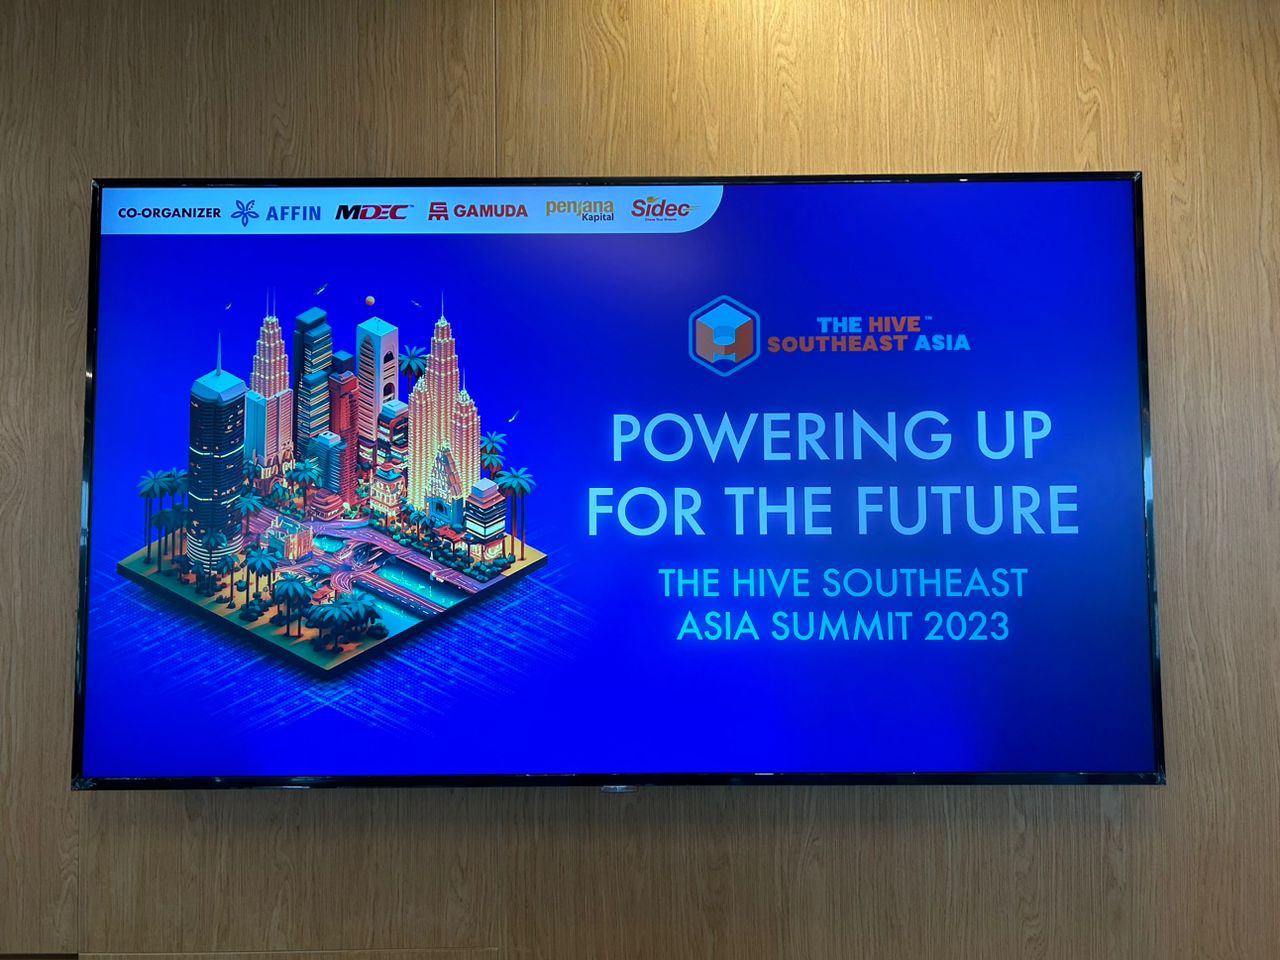 The Hive Southeast Asia Summit 2023 Powering Up for The Future